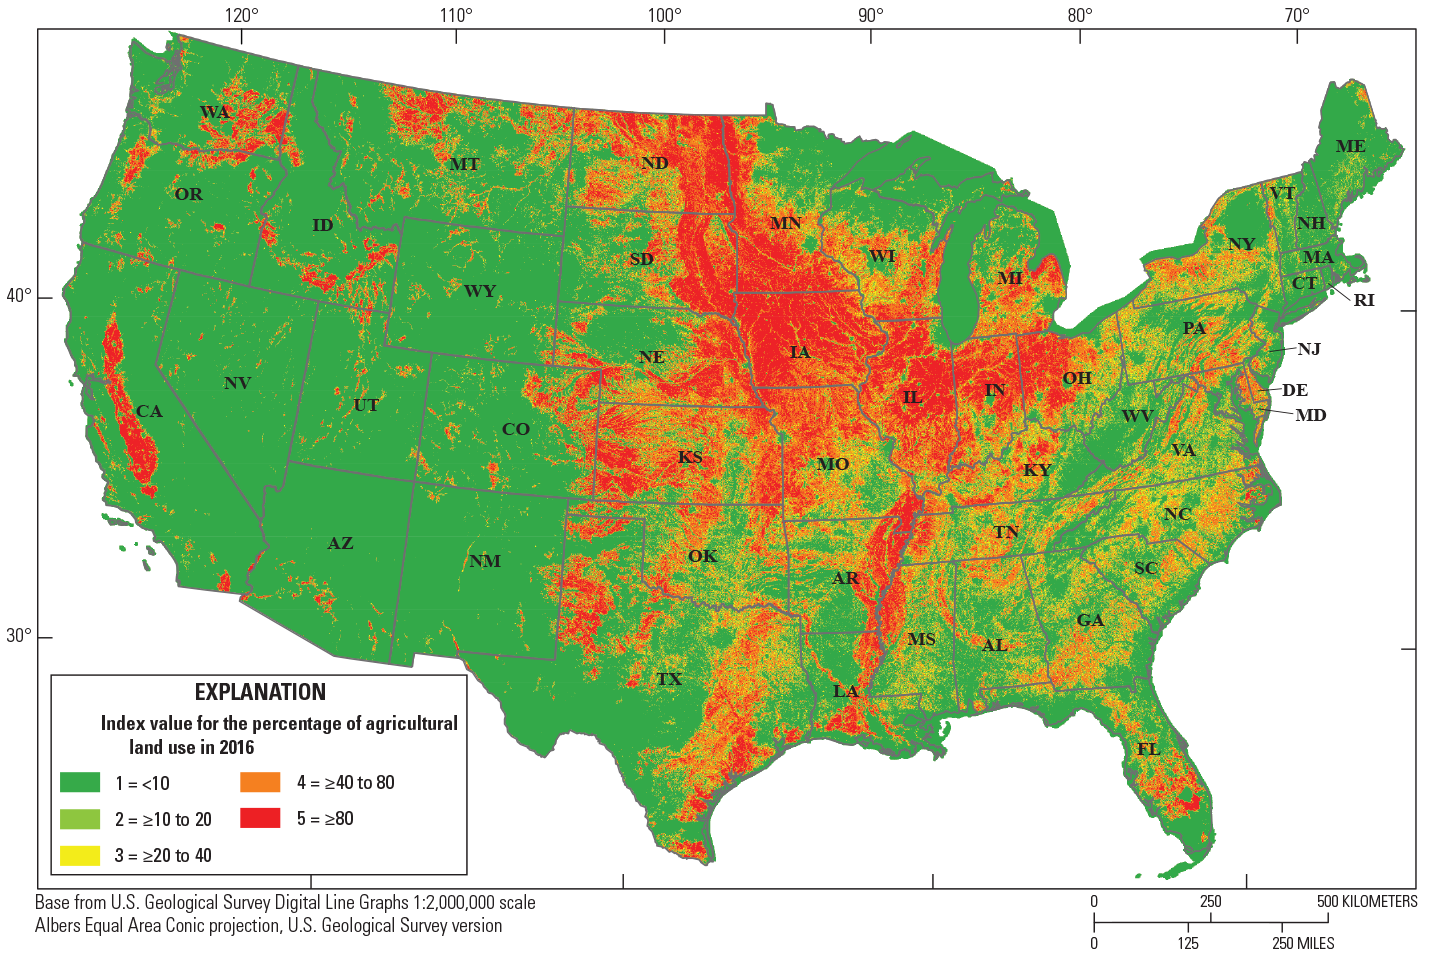 Agricultural land use is greatest throughout the central part of the United States
                        from the Canadian border to Texas, and the Central Valley of California